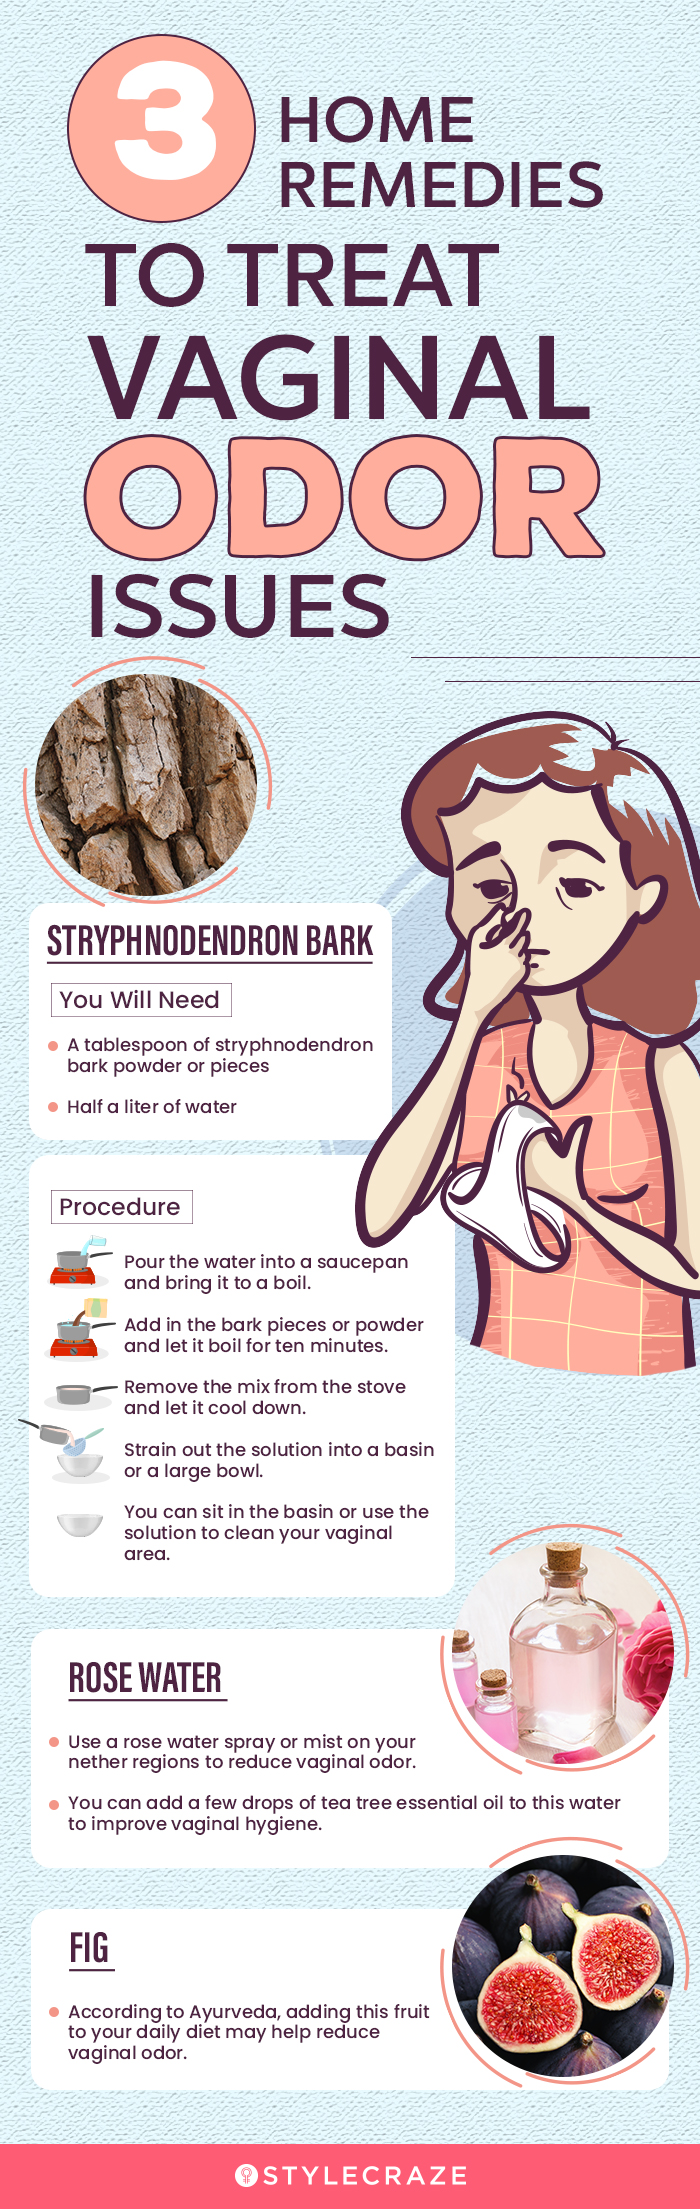 home remedies to treat vaginal odor issues (infographic)